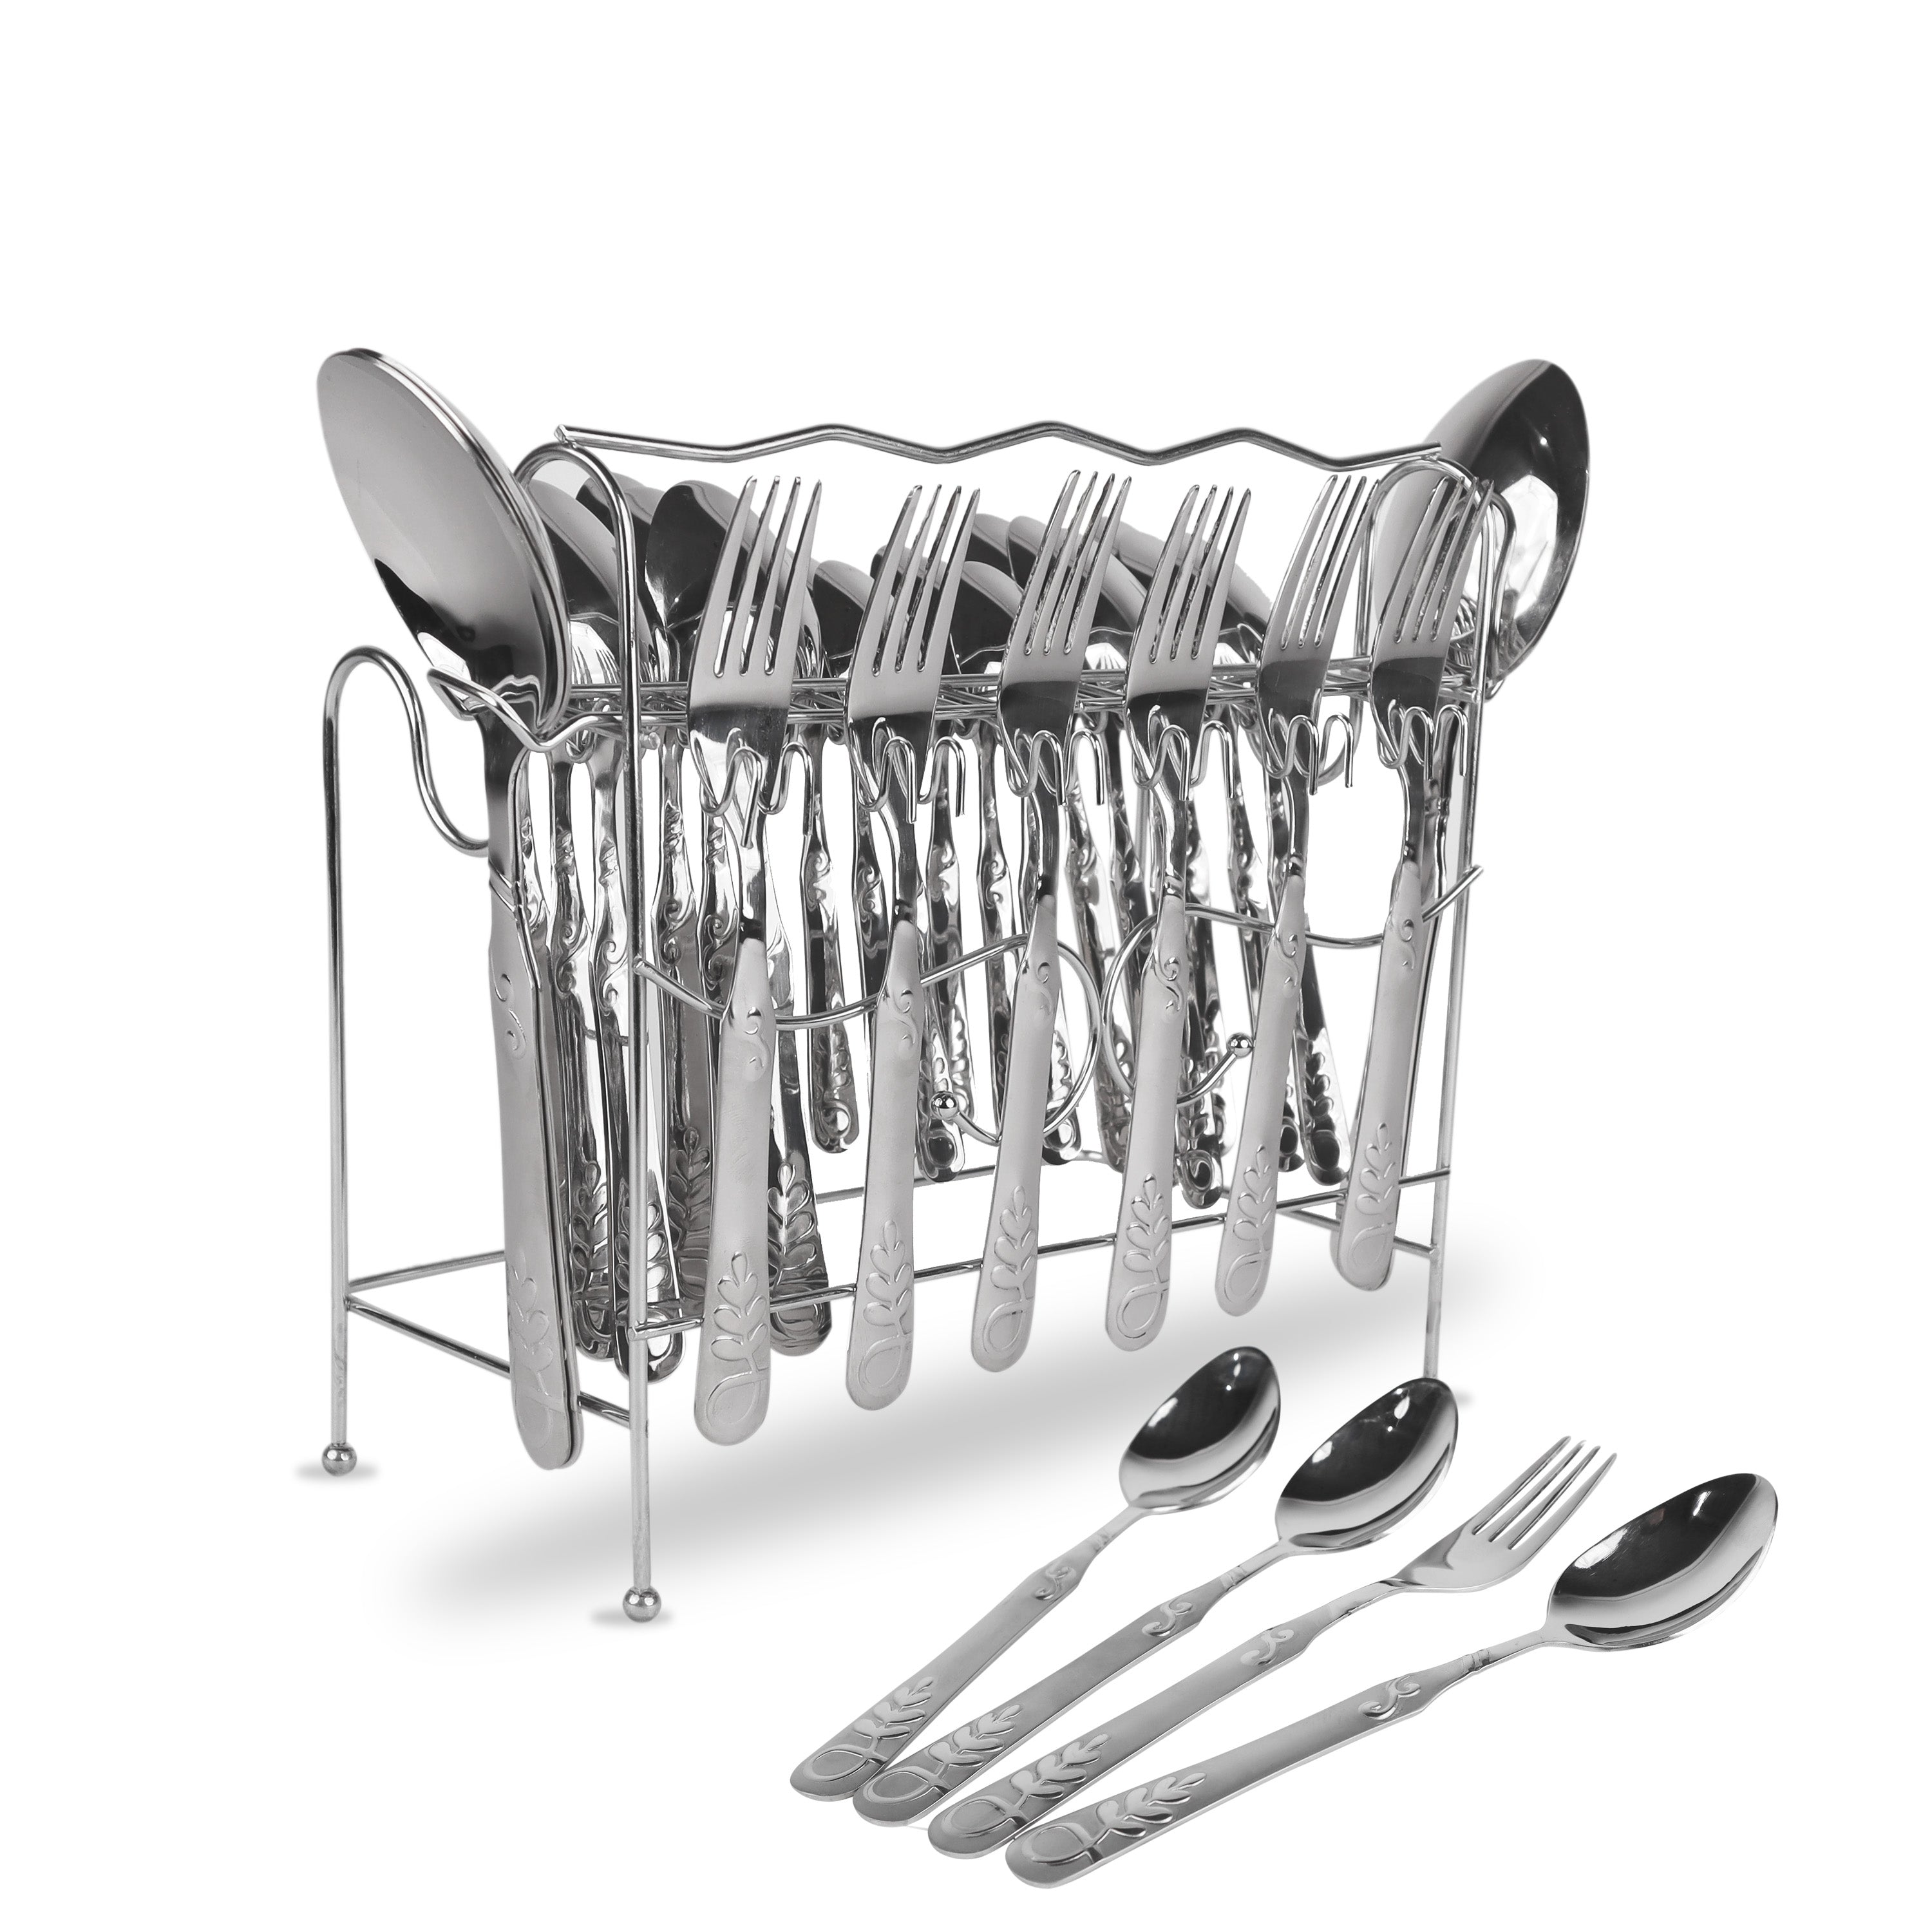 Chef Best Quality Stainless Steel 29 Pcs Cutlery Set - End Flower